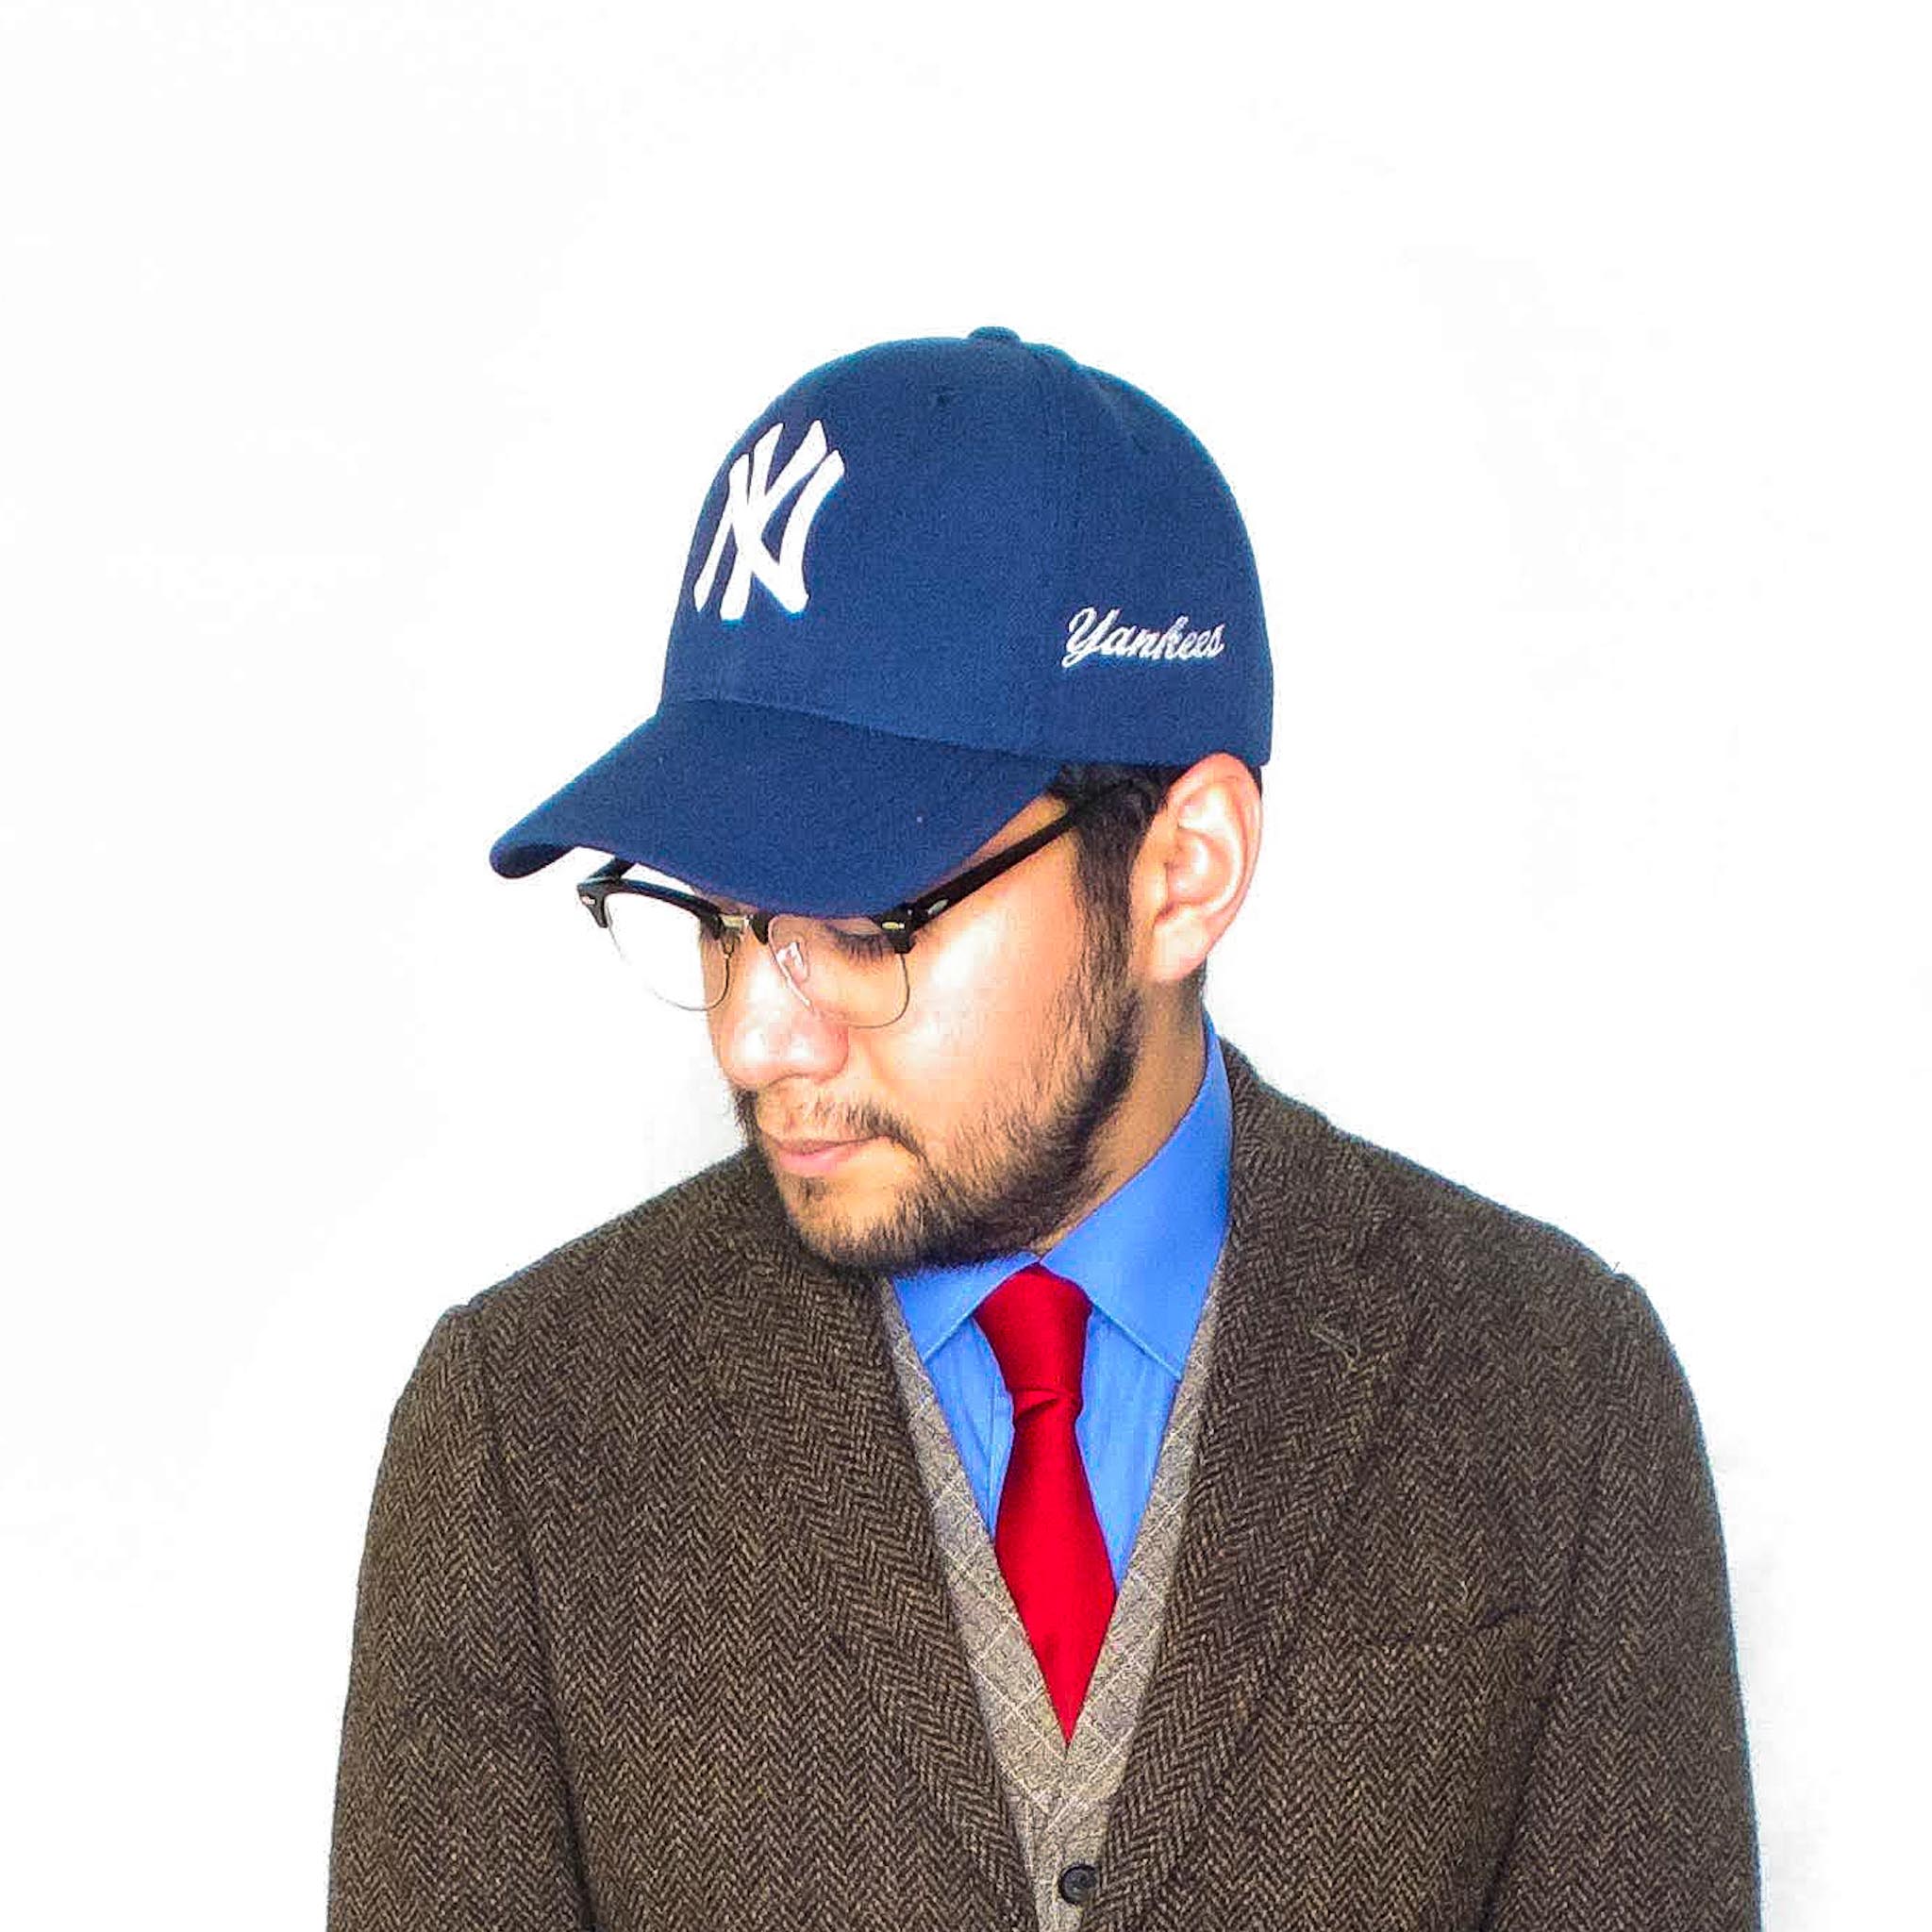 hat - baseball cap - casual hat - yankees hat - dandy in the bronx - cap with suit - 